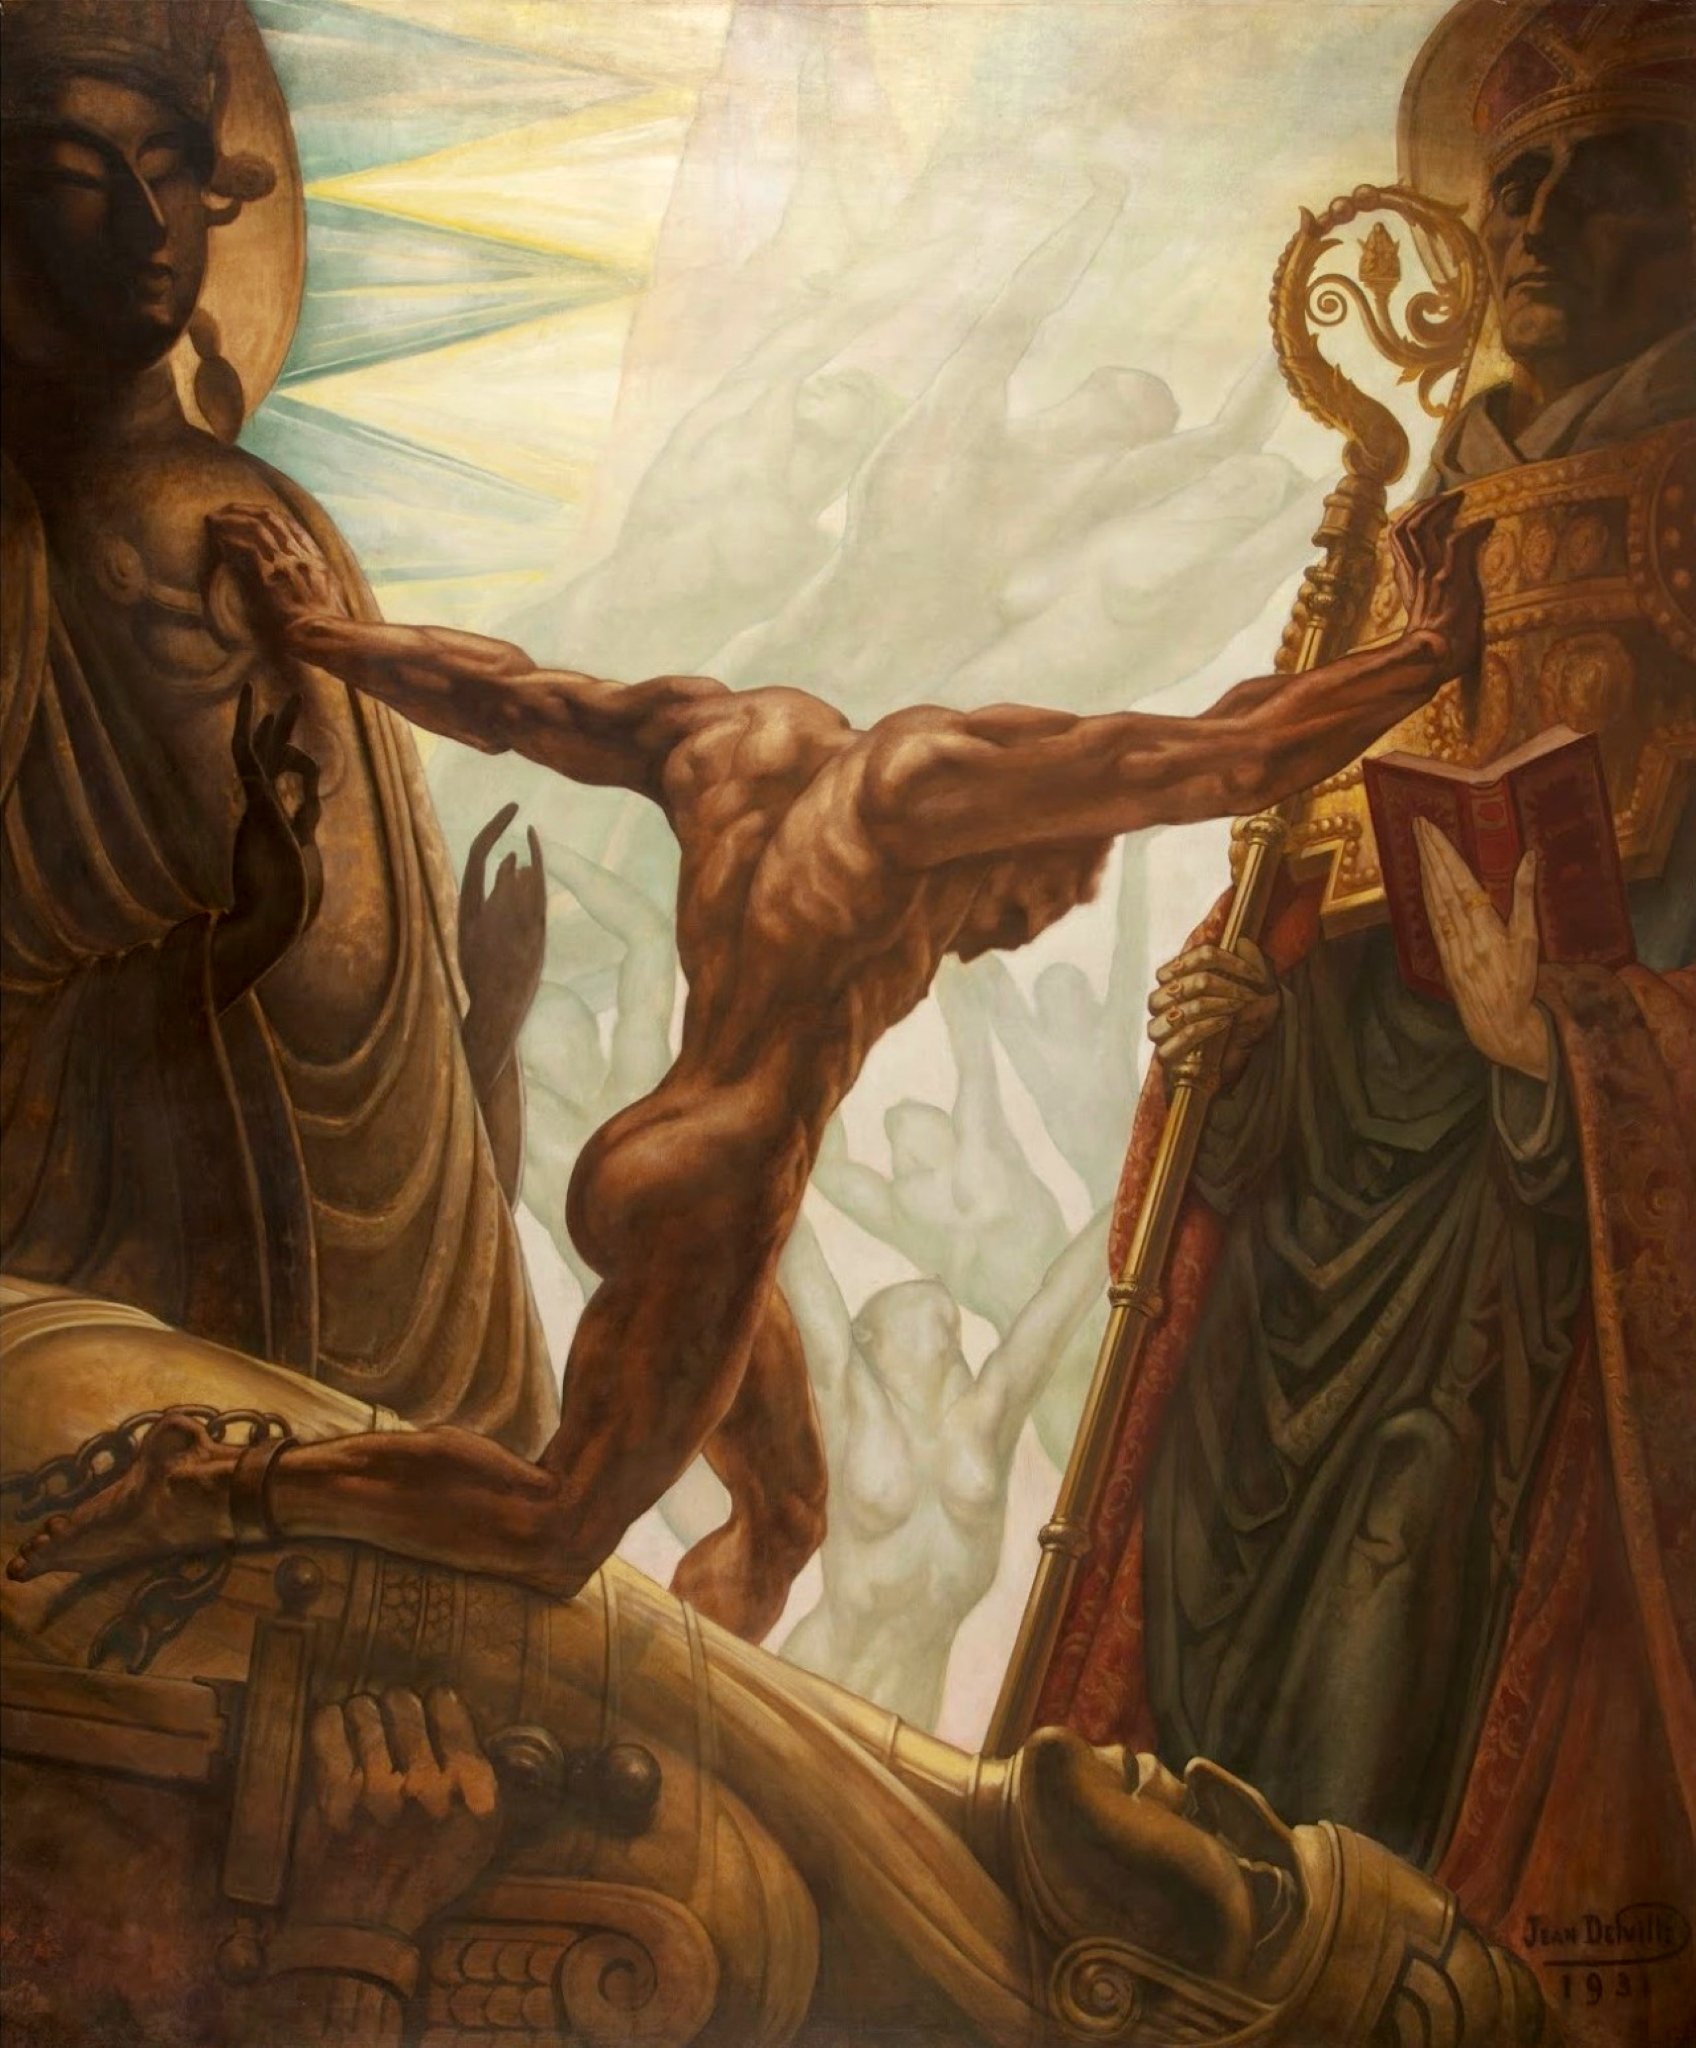 Painting by Jean Delville depicting a figure using strength to push apart symbols of institutional religion to reach the unconditioned light of the Divine